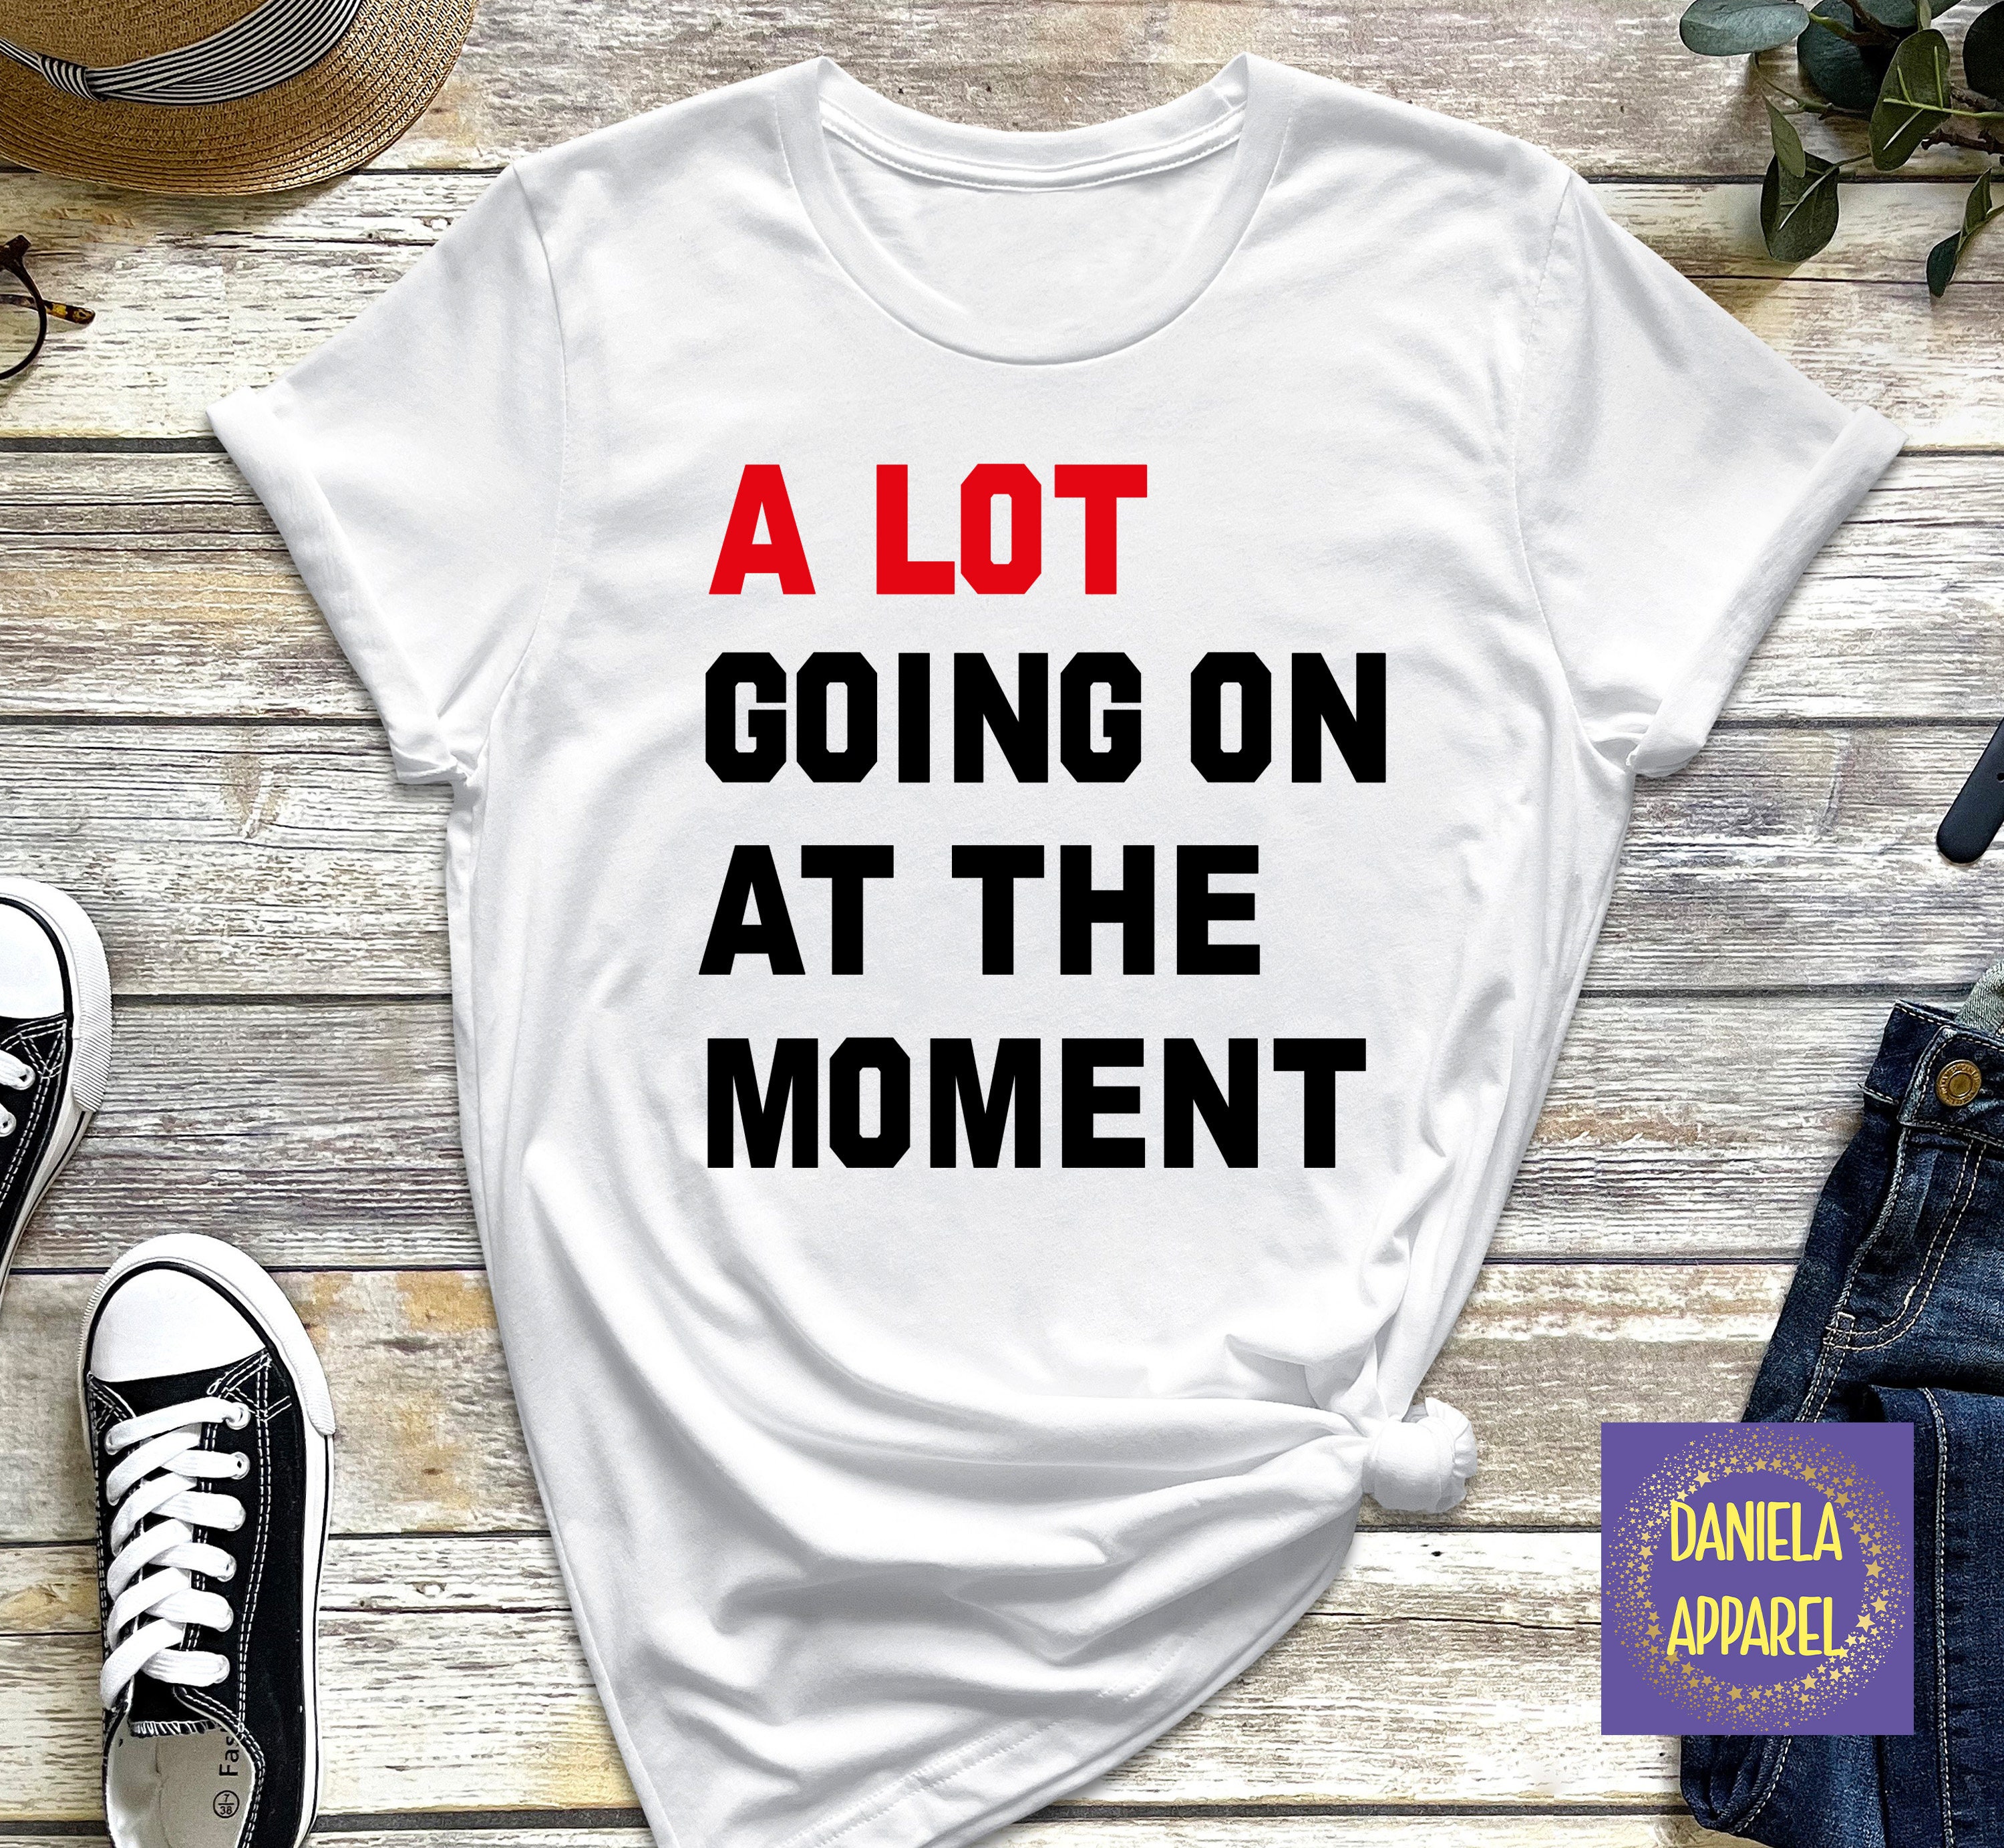 A Lot Going On at The Moment Shirt Women's Country Music T-Shirt